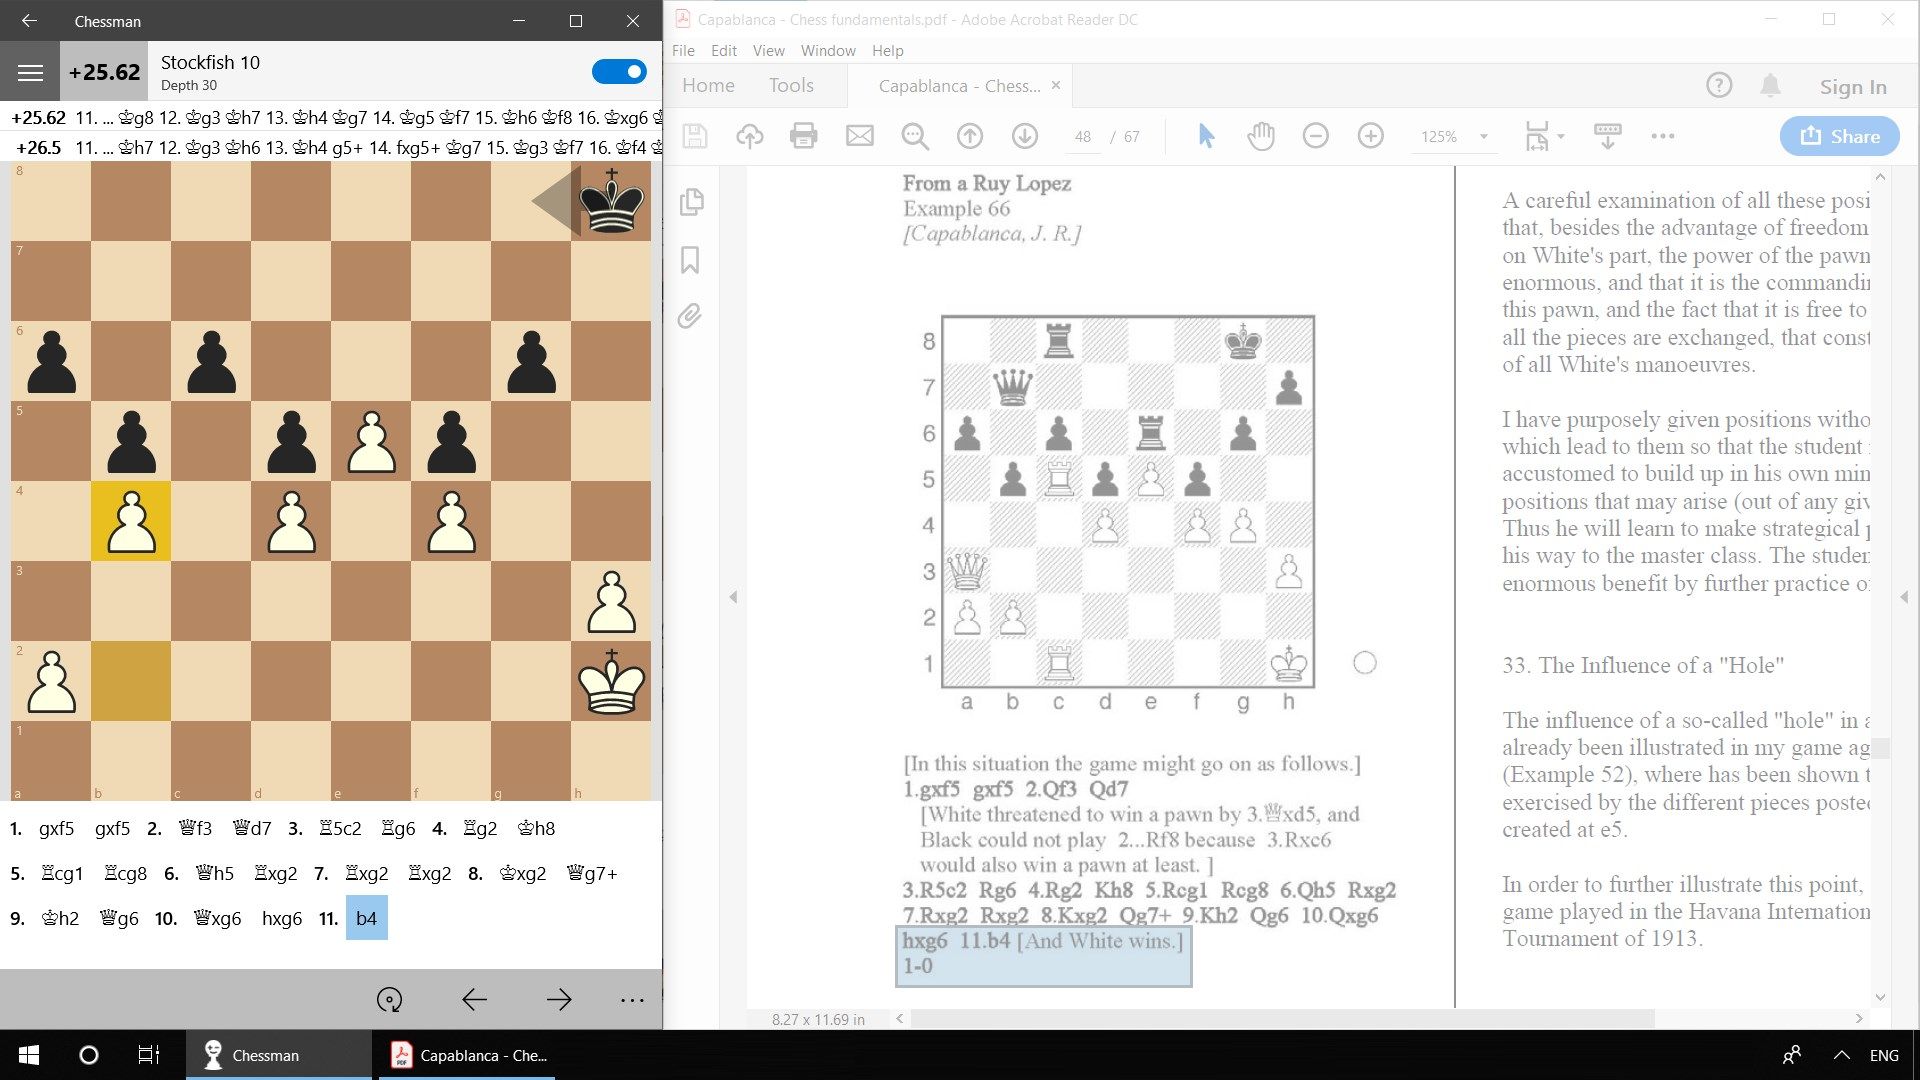 Responsive layout to use as a chess board when studying books